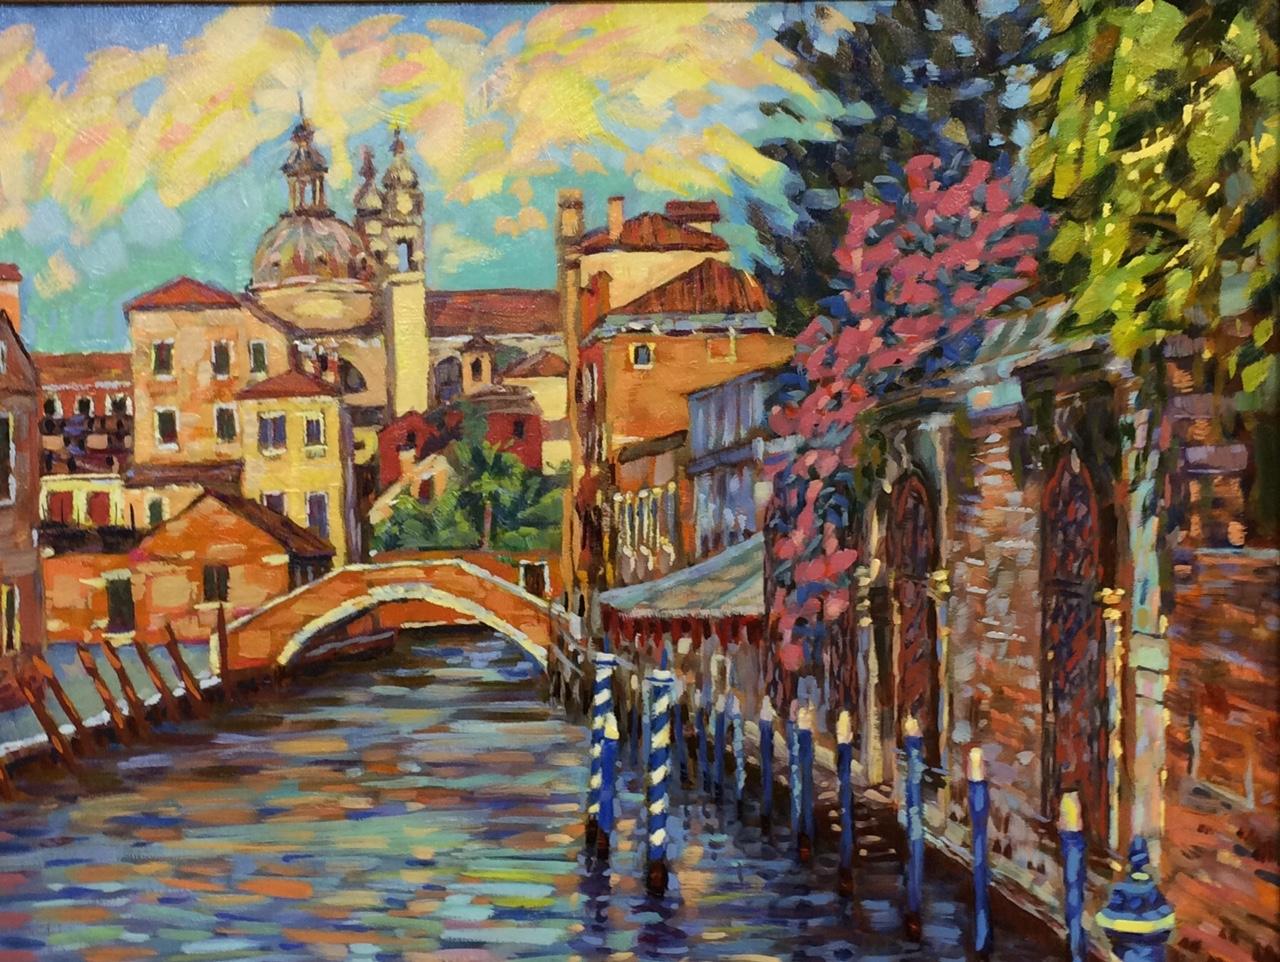 Evening Maria, Venice, original expressionistic landscape - Painting by Charles Tersolo